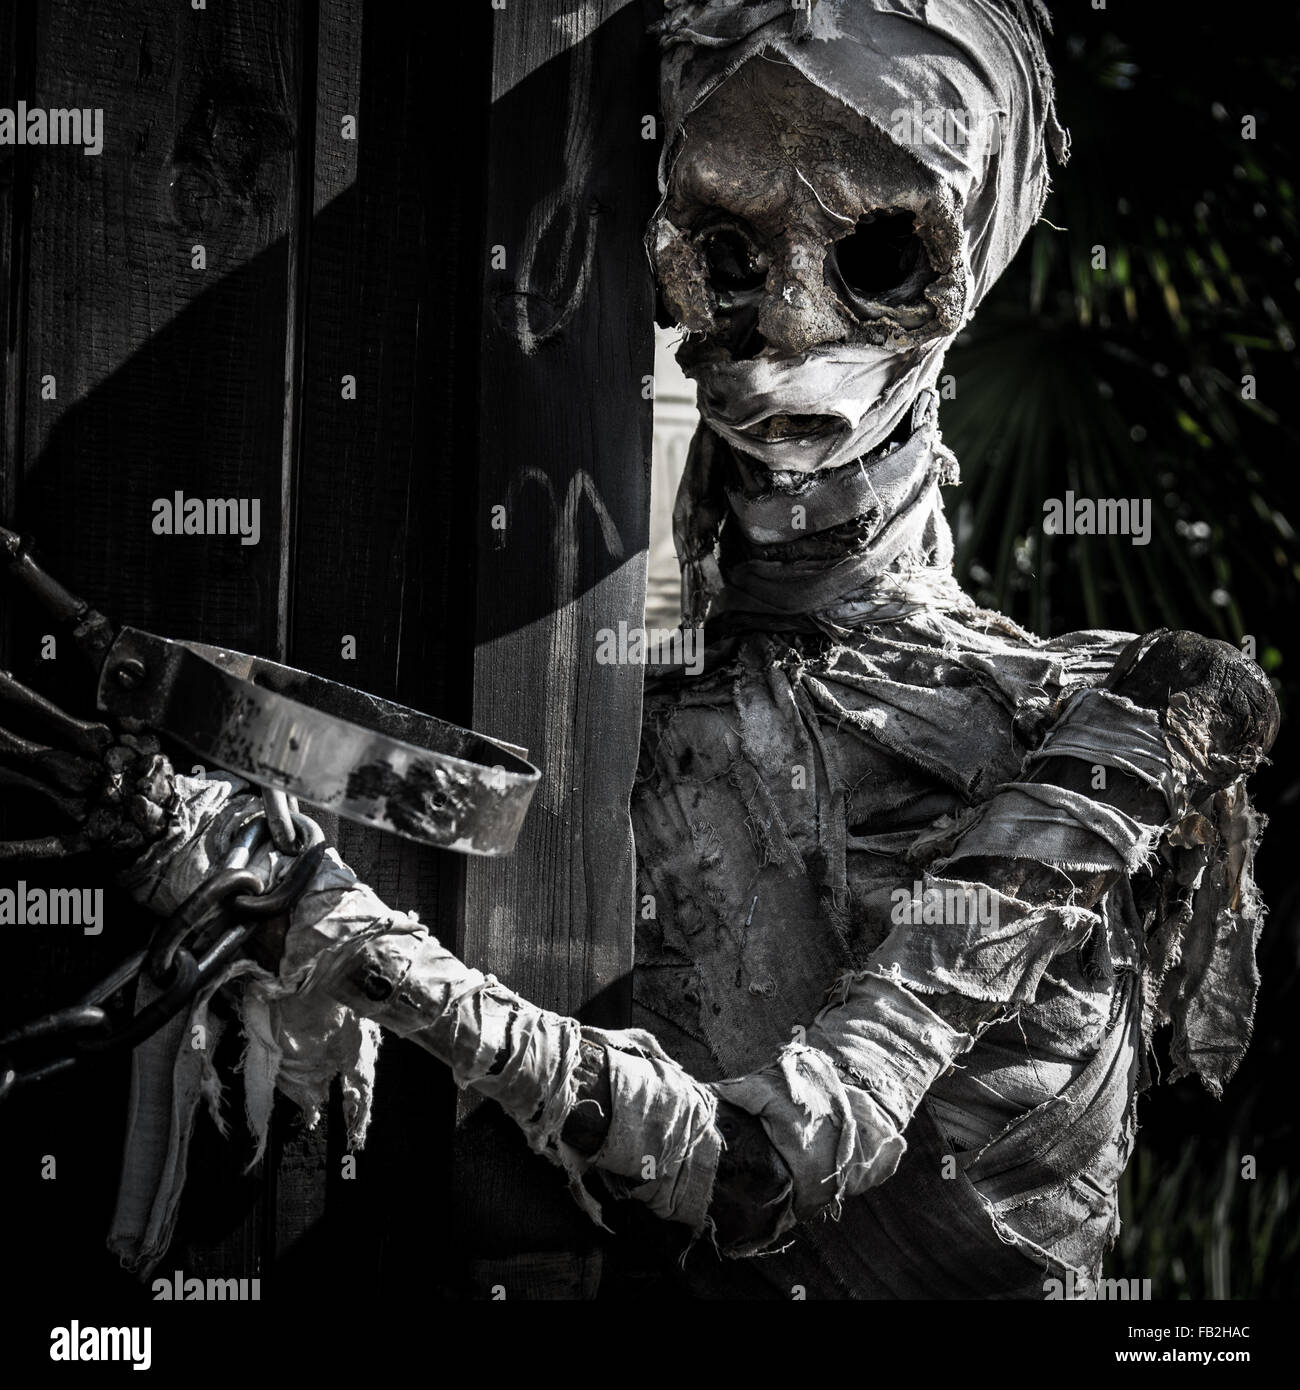 Mummified corpse wrapped in a bandage worn down and rumpled. Stock Photo